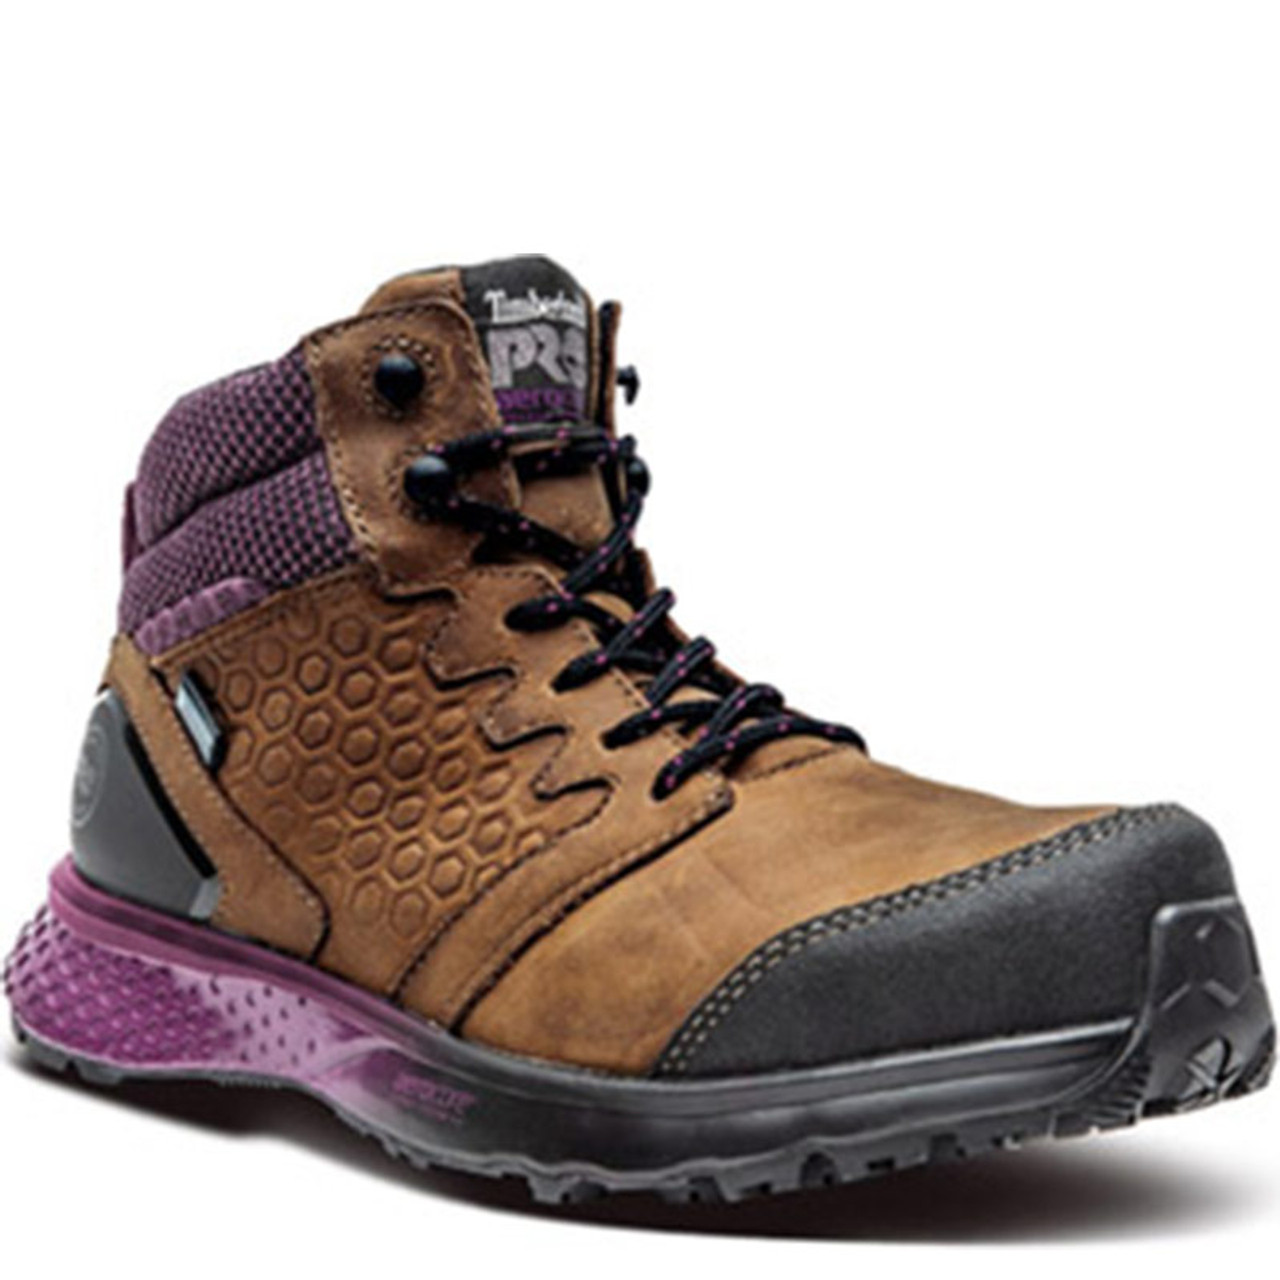 composite toe womens work boots